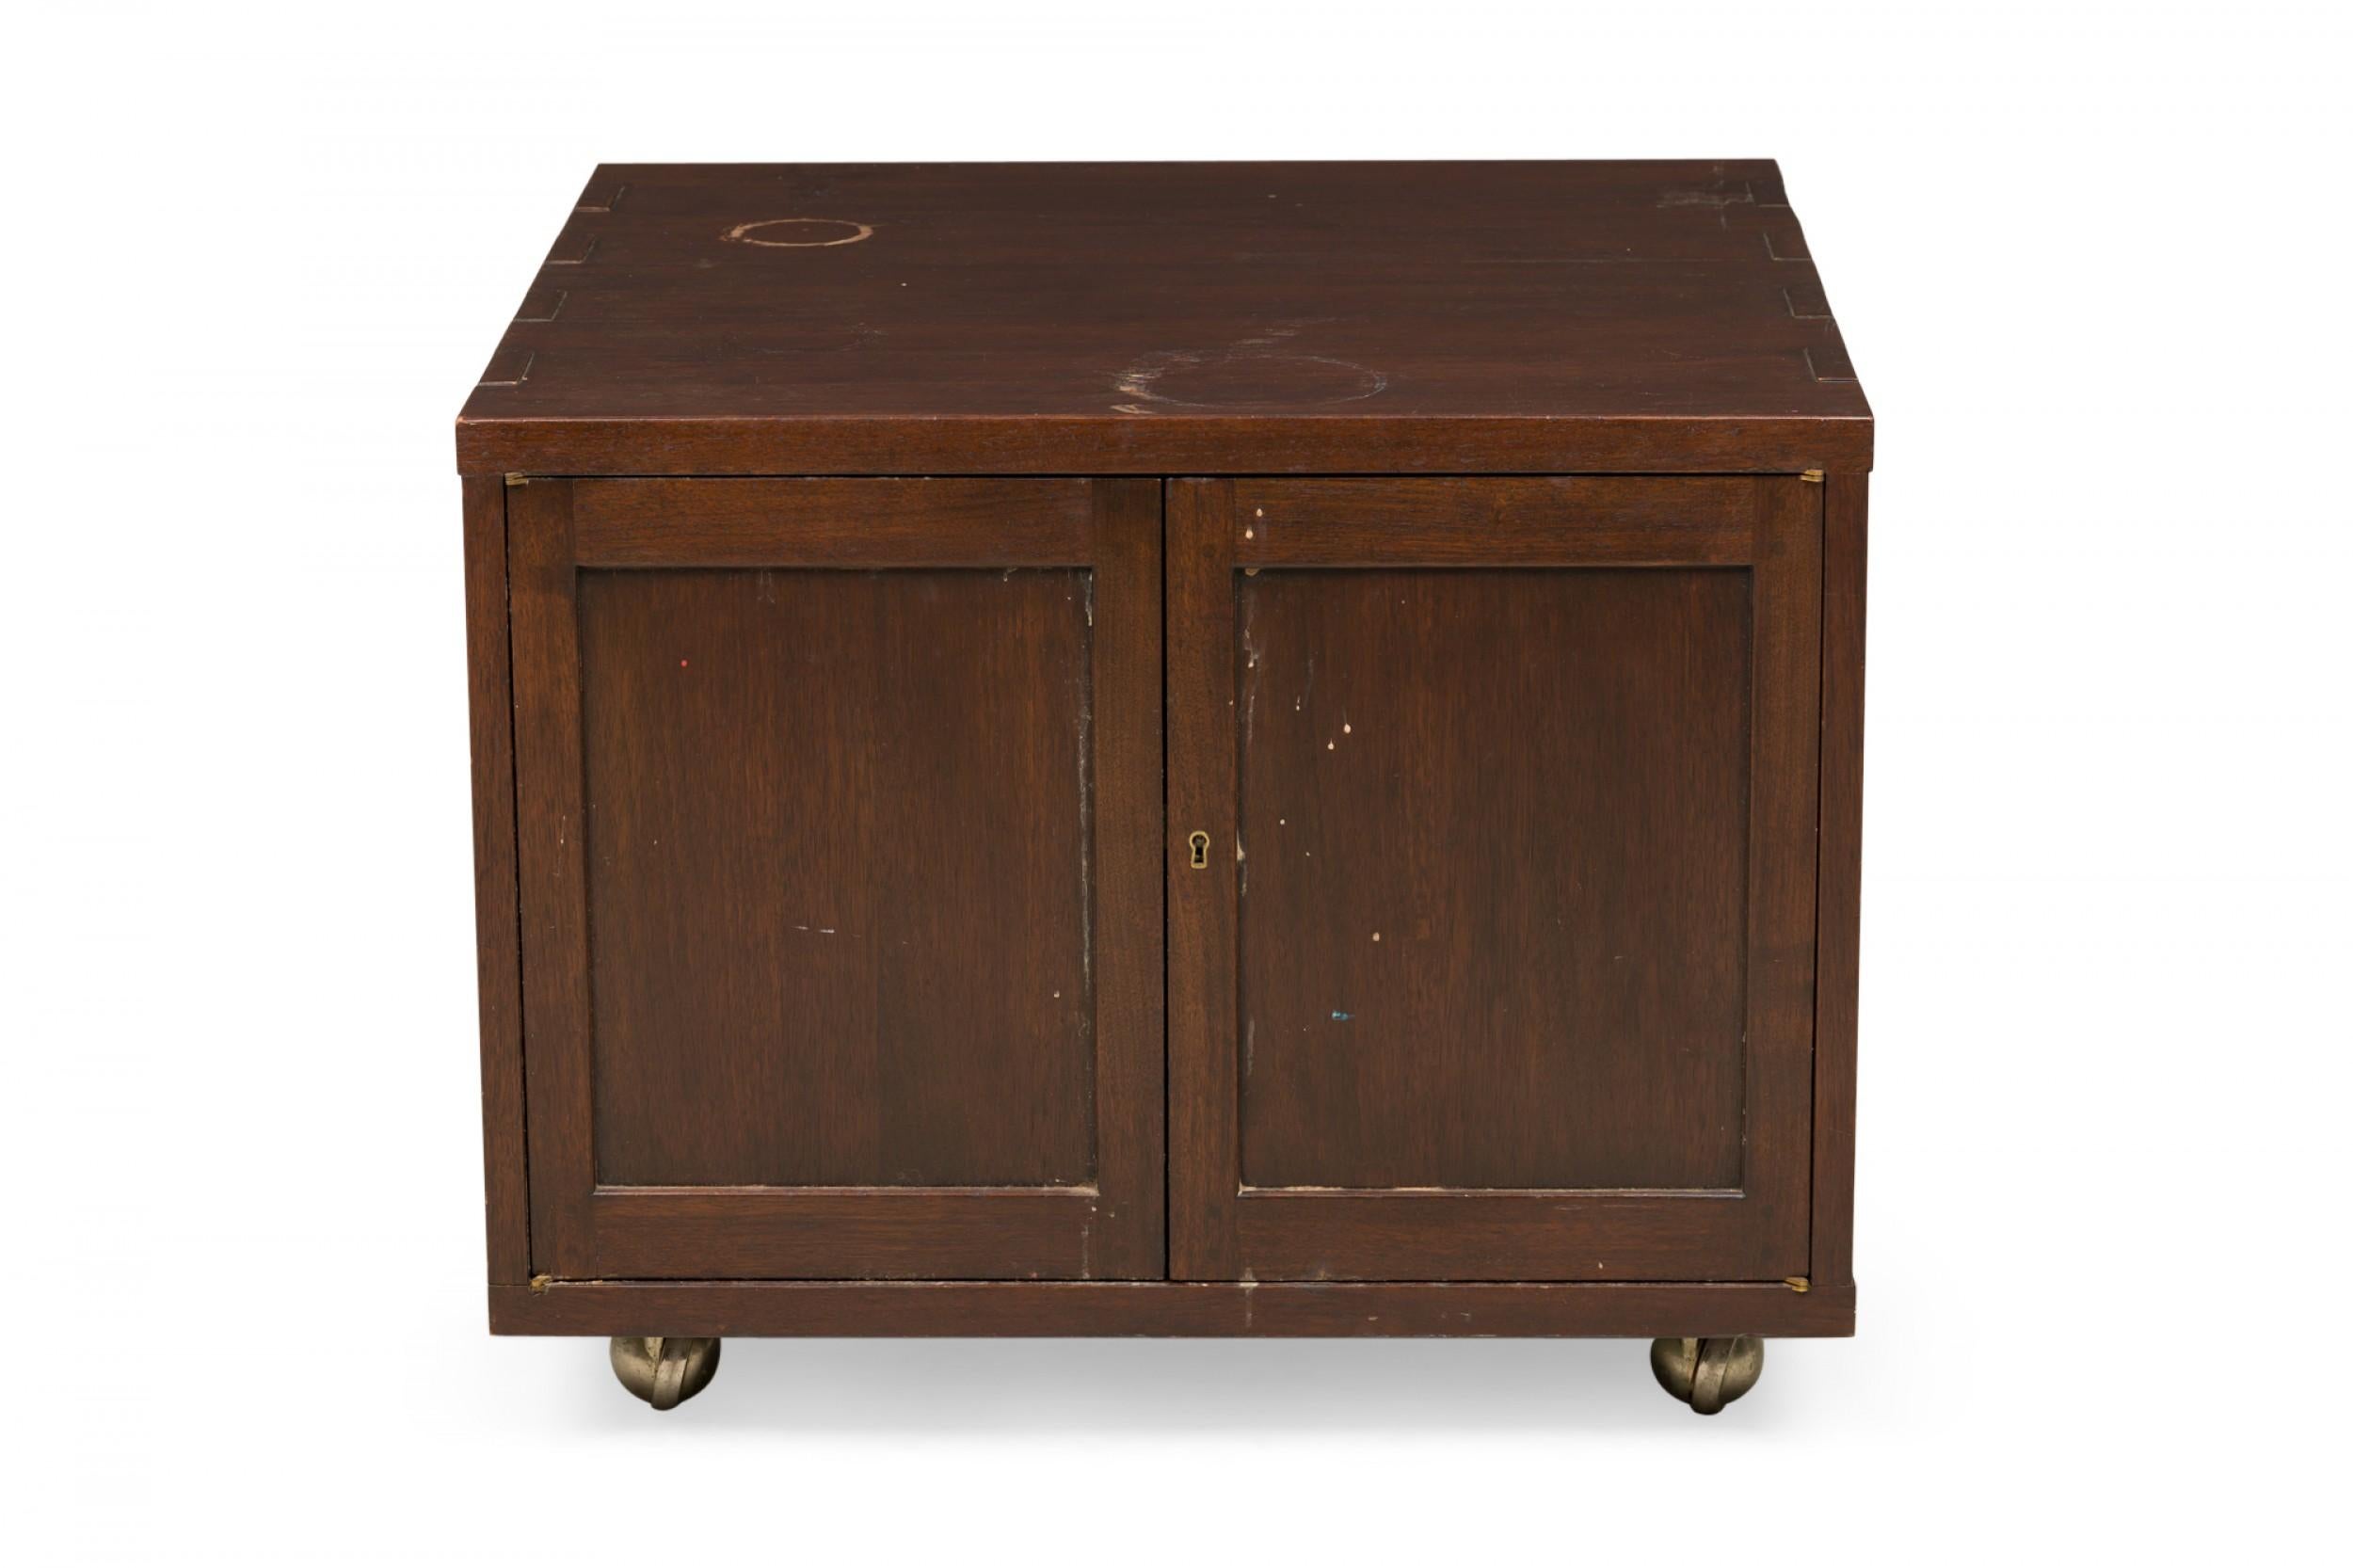 American Mid-Century cabinet with a dark stained walnut cabinet with two hinged doors, a dovetail connected top, and key hole, resting on four ball casters. (EDWARD WORMLEY FOR DUNBAR FURNITURE COMPANY)
